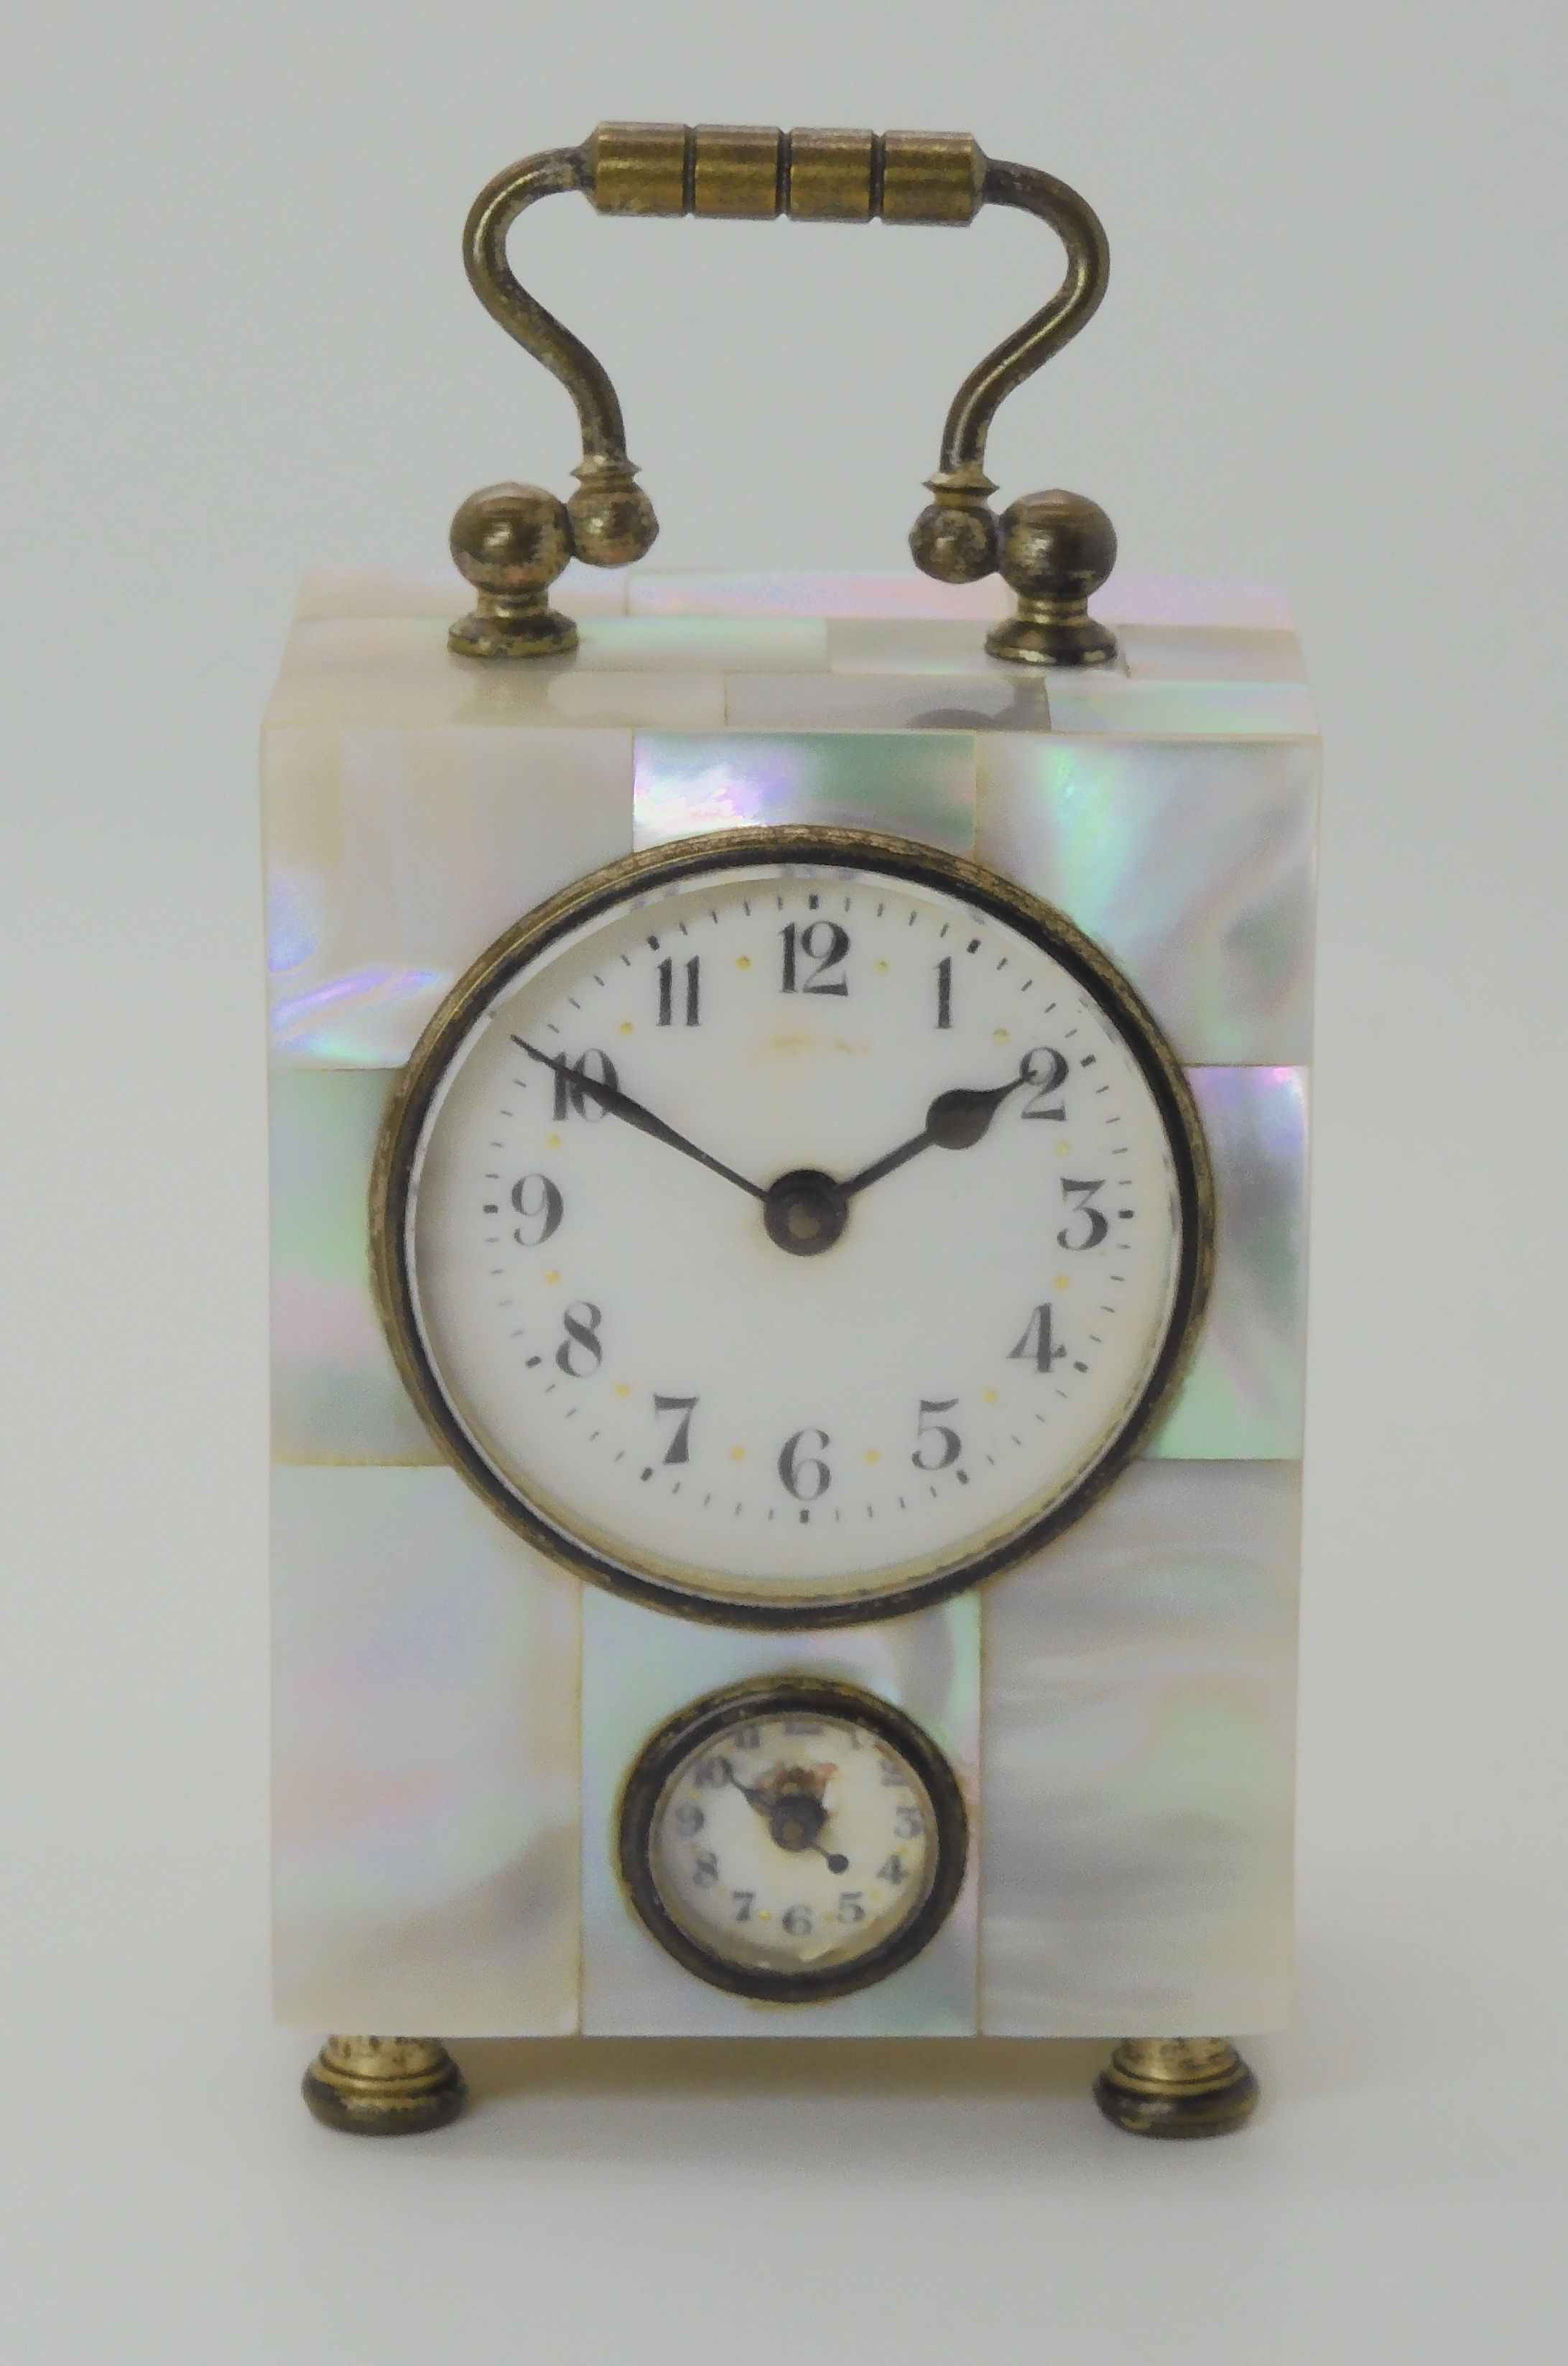 A MOTHER OF PEARL WECKER ALARM CARRIAGE CLOCK stamped D R P & G M, with a regular dial and an